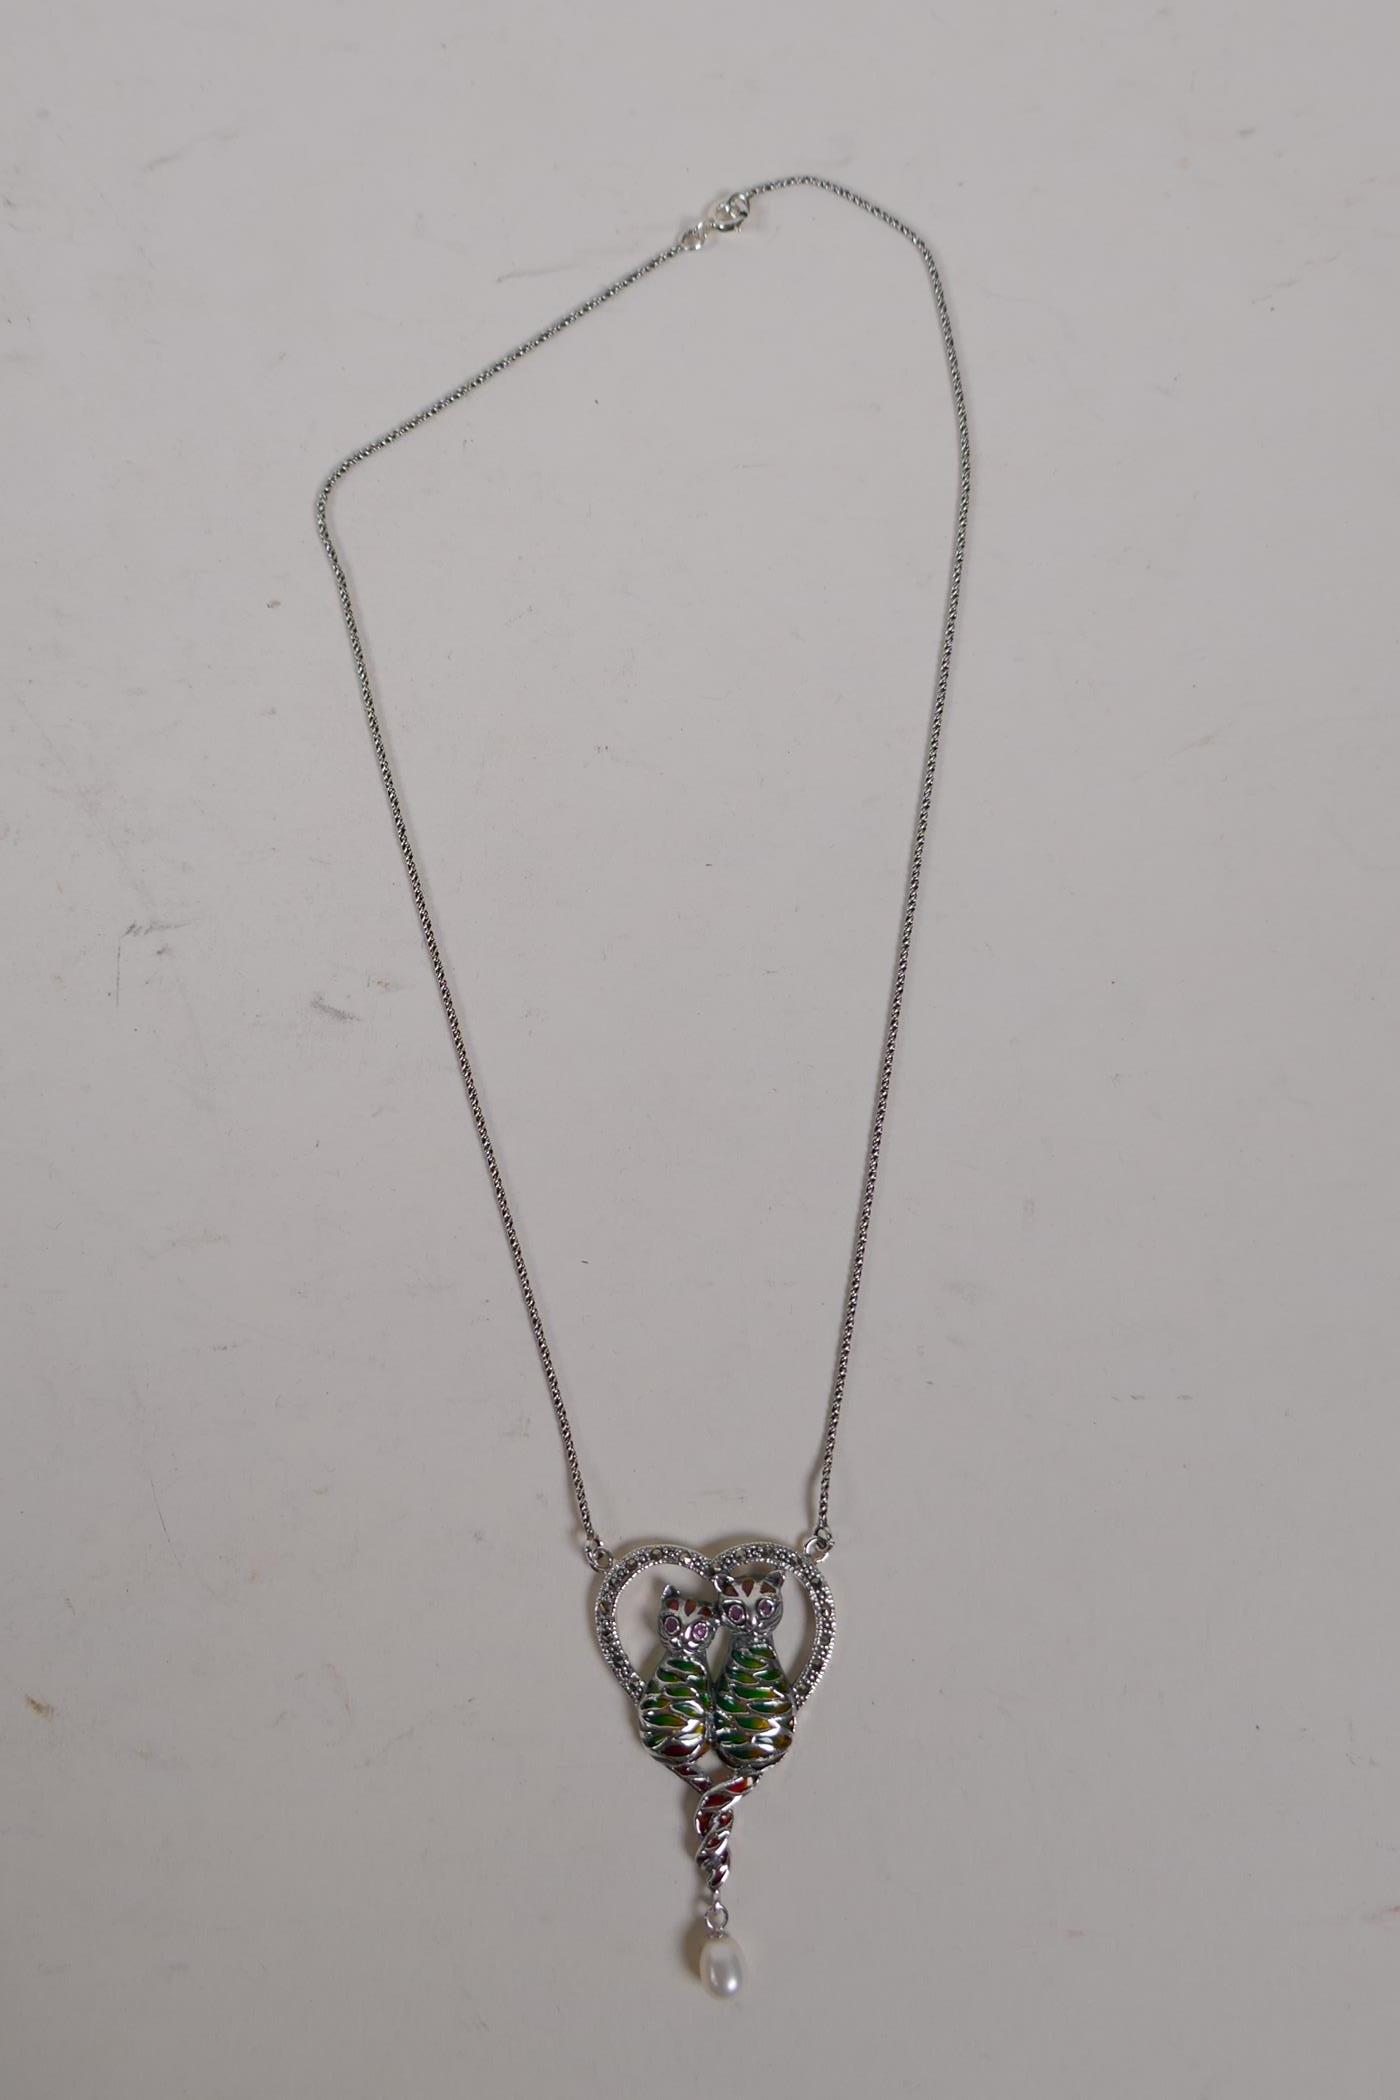 A 925 silver and plique a jour pendant necklace in the form of two cats within a heart, 5cm drop - Image 2 of 3